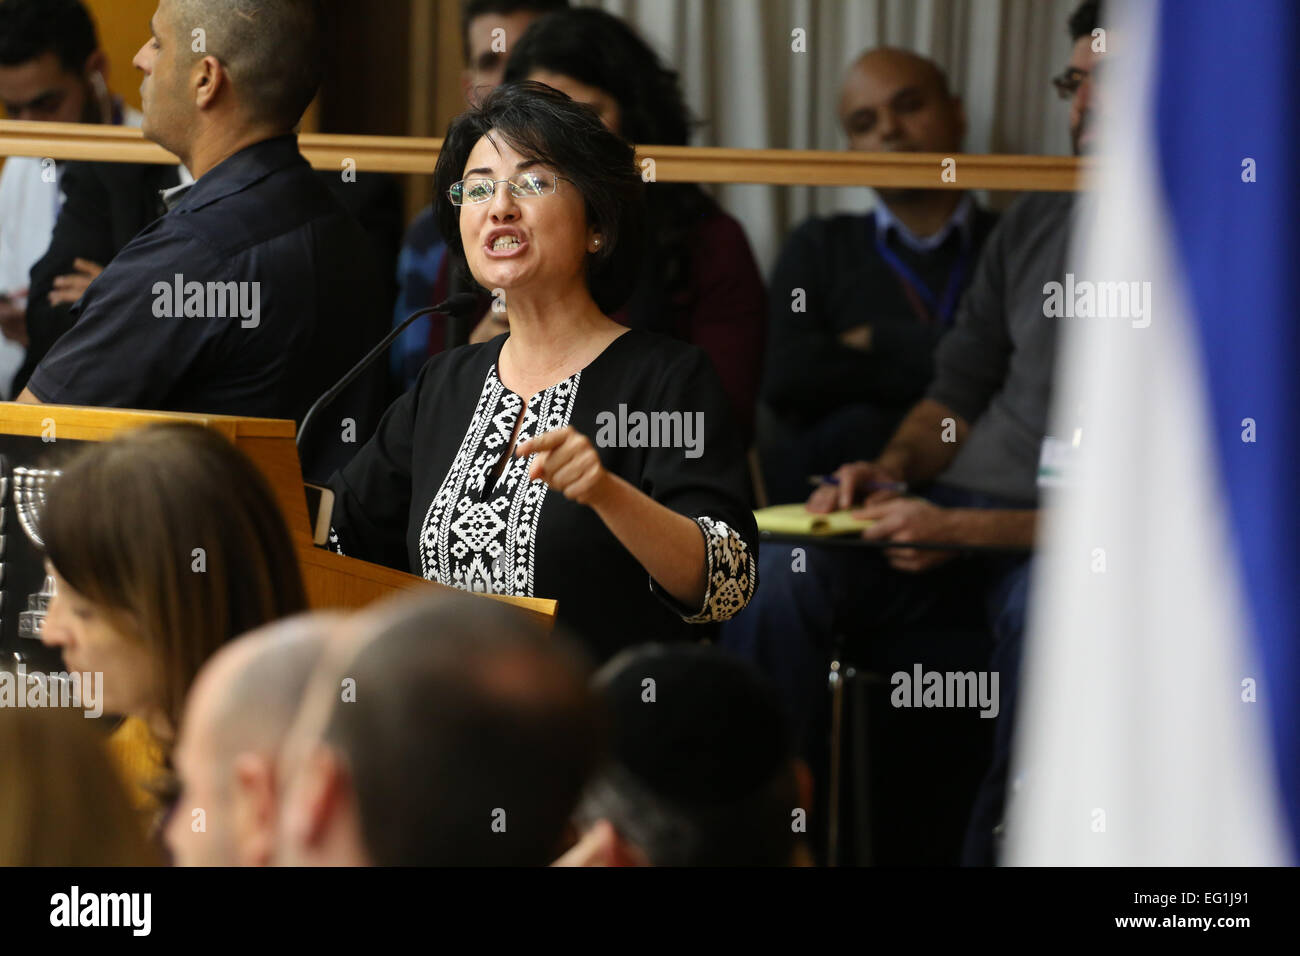 Jerusalem. 12th Feb, 2015. Arab Israeli lawmaker Hanin Zoabi speaks during a vote to disqualify her from running for Knesset elections at the Israeli Central Elections Committee in the Israeli Knesset (parliament) in Jerusalem, on Feb. 12, 2015. The Israeli Central Elections Committee decided on Thursday to ban an Arab lawmaker and a far right-wing activist from running in the upcoming elections due to their controversial public remarks. © JINI/Xinhua/Alamy Live News Stock Photo